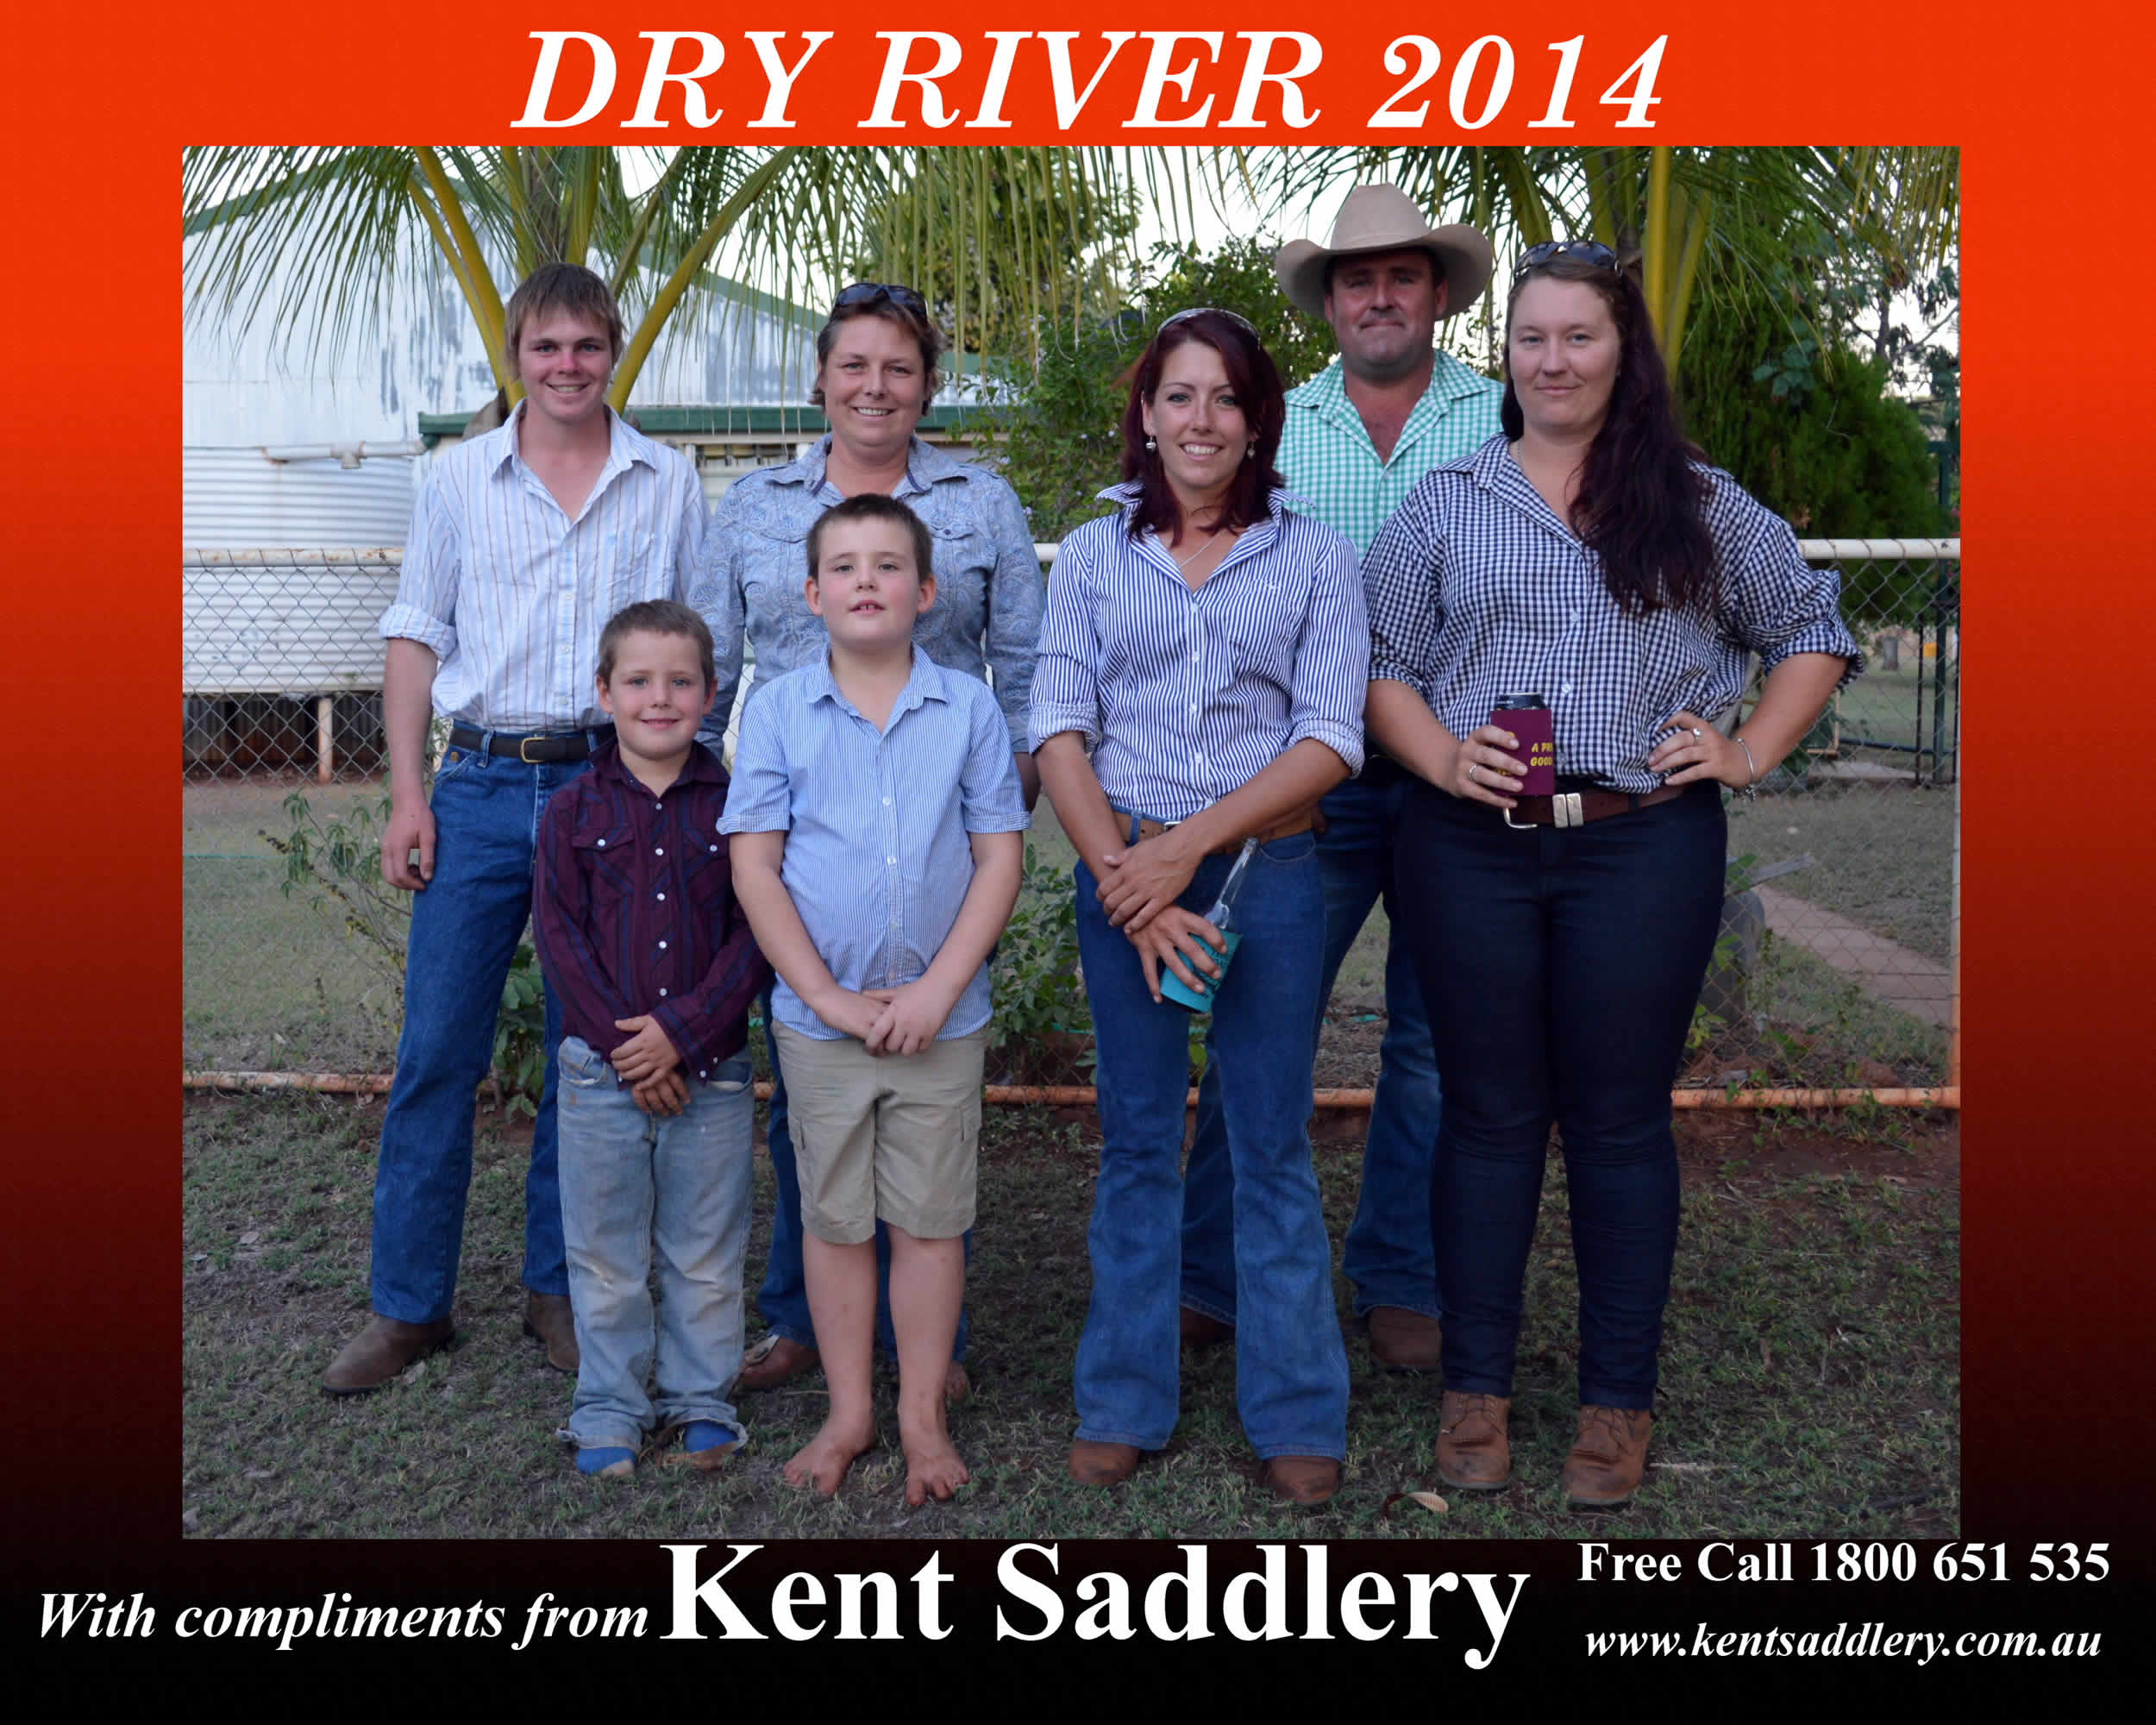 Northern Territory - Dry River 2